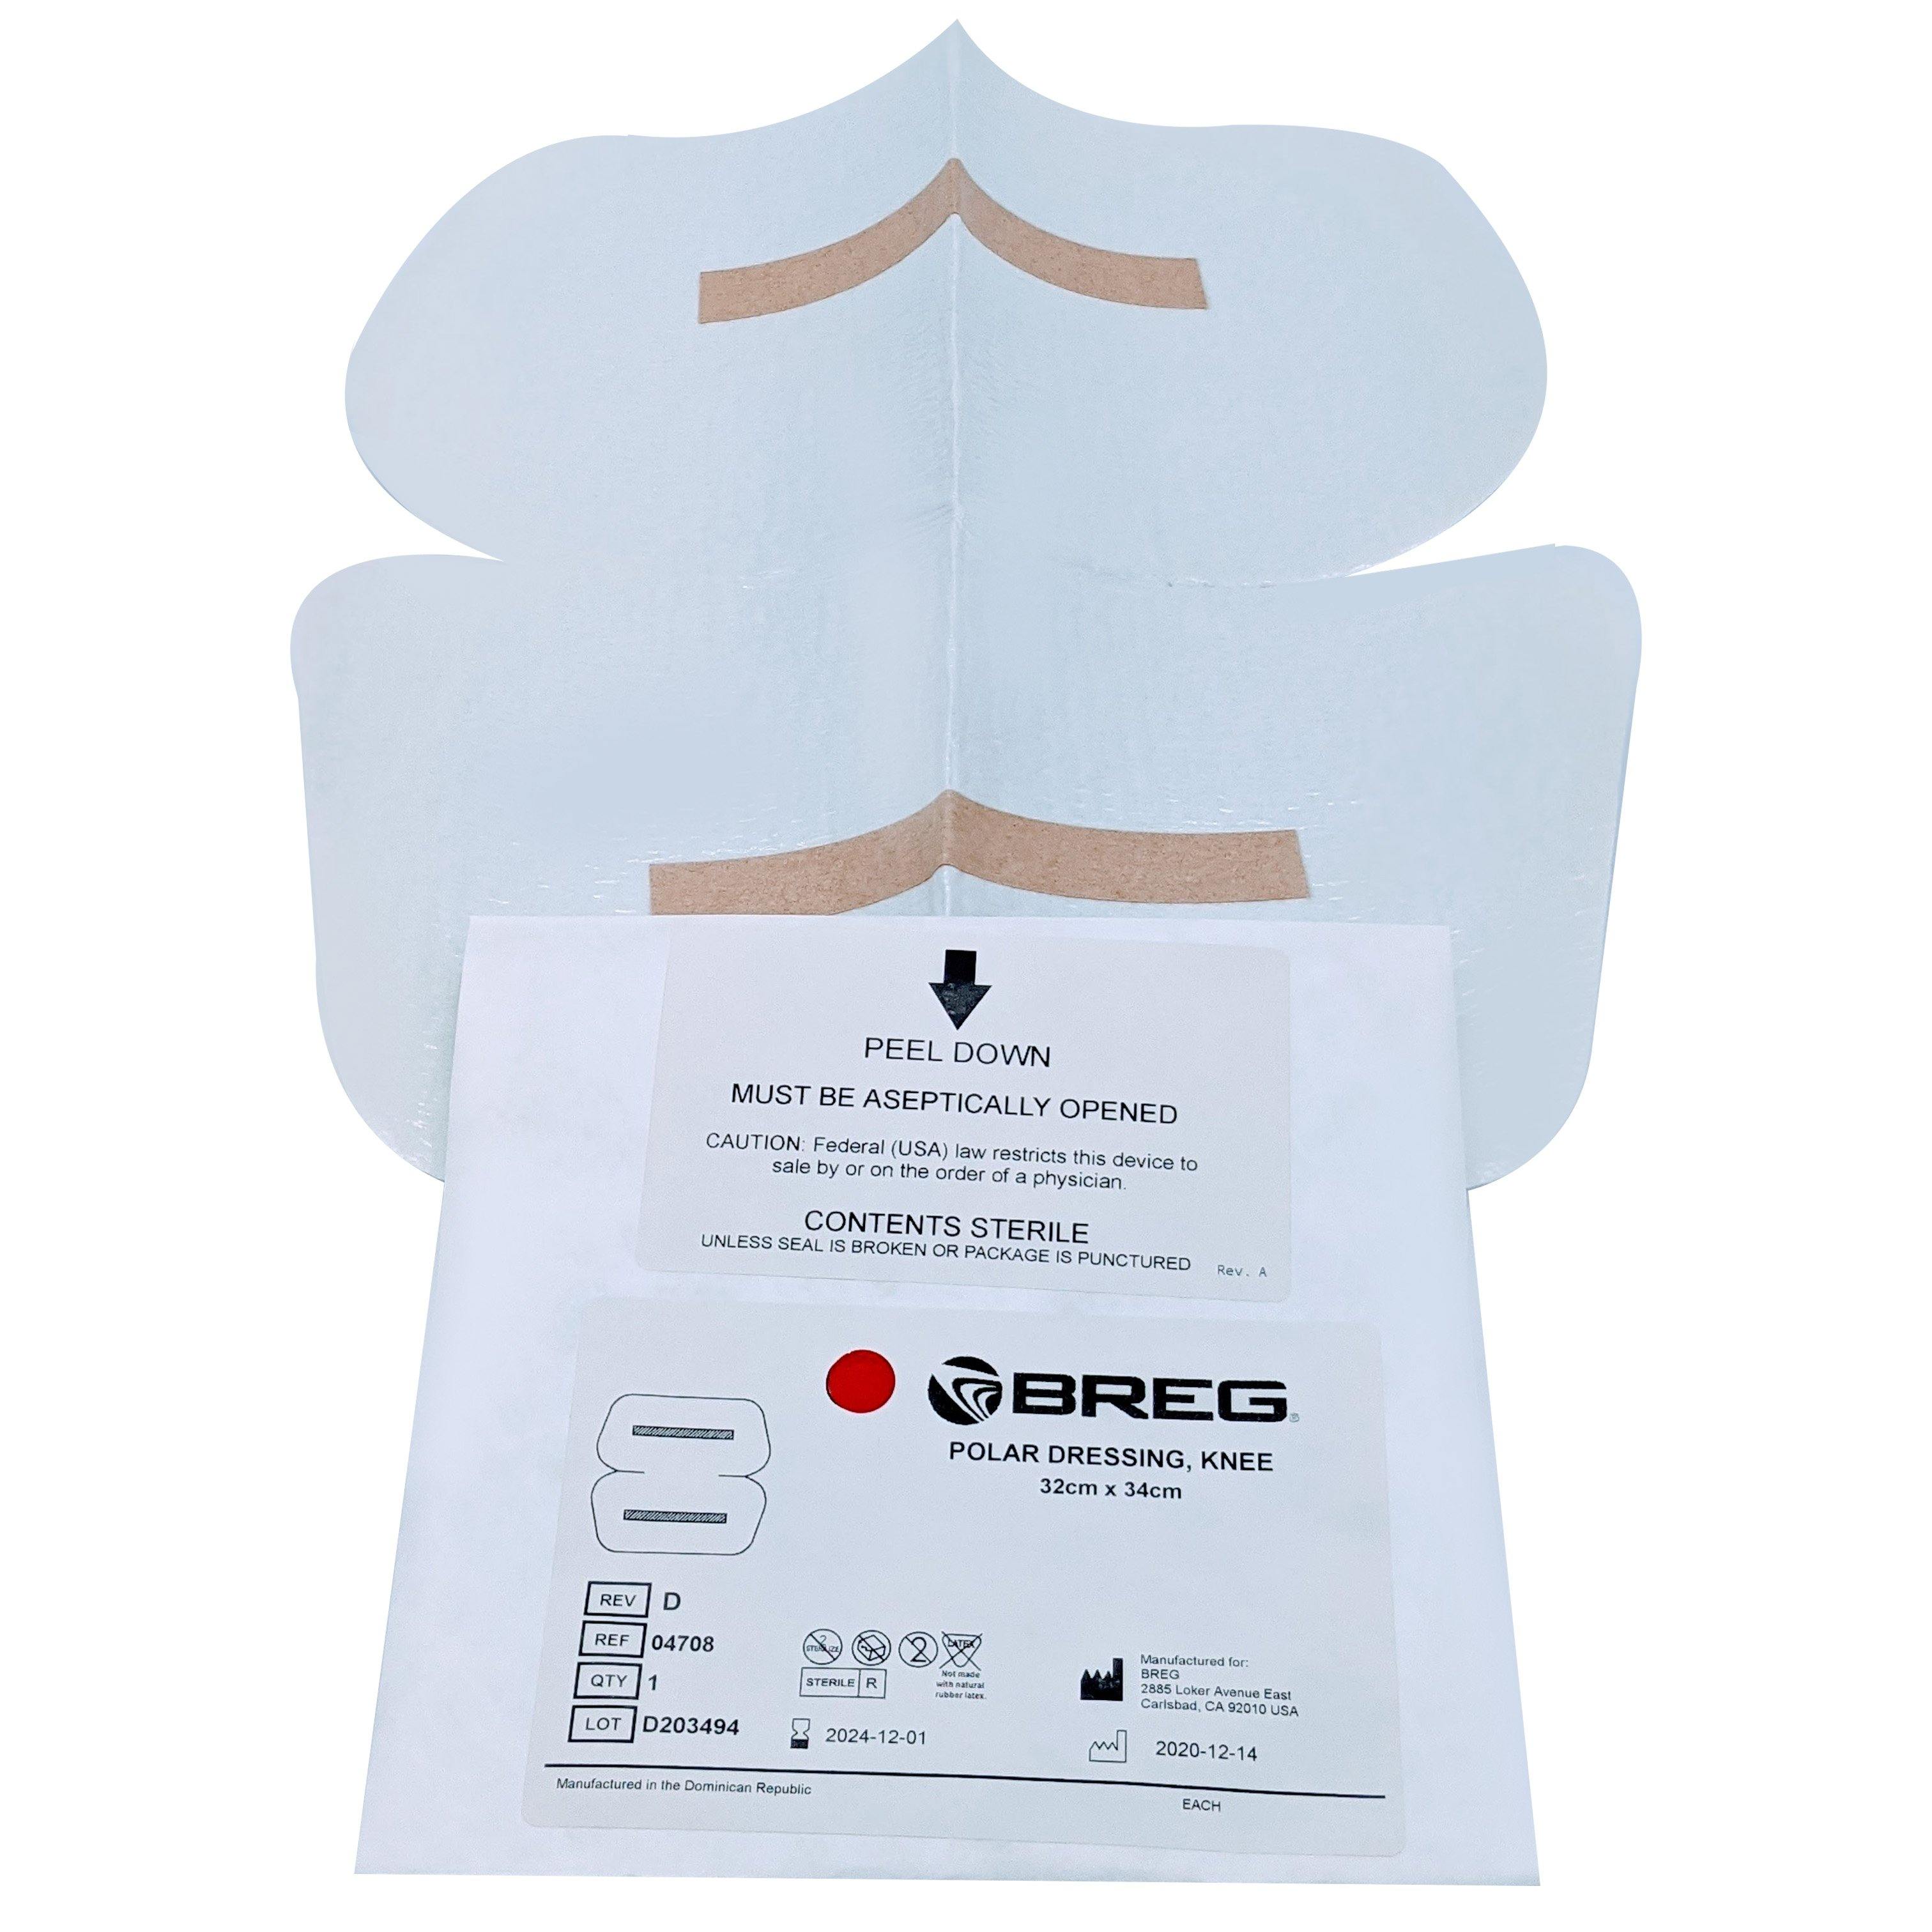 Breg® Polar Care Cube & Glacier Sterile Dressings - 02344 Breg® Polar Care Cube & Glacier Sterile Dressings - undefined by Supply Physical Therapy Accessories, Breg, Breg Accessories, Cube, Cube Accessories, Glacier, Glacier Accessories, Replacement, Sterile, Wraps